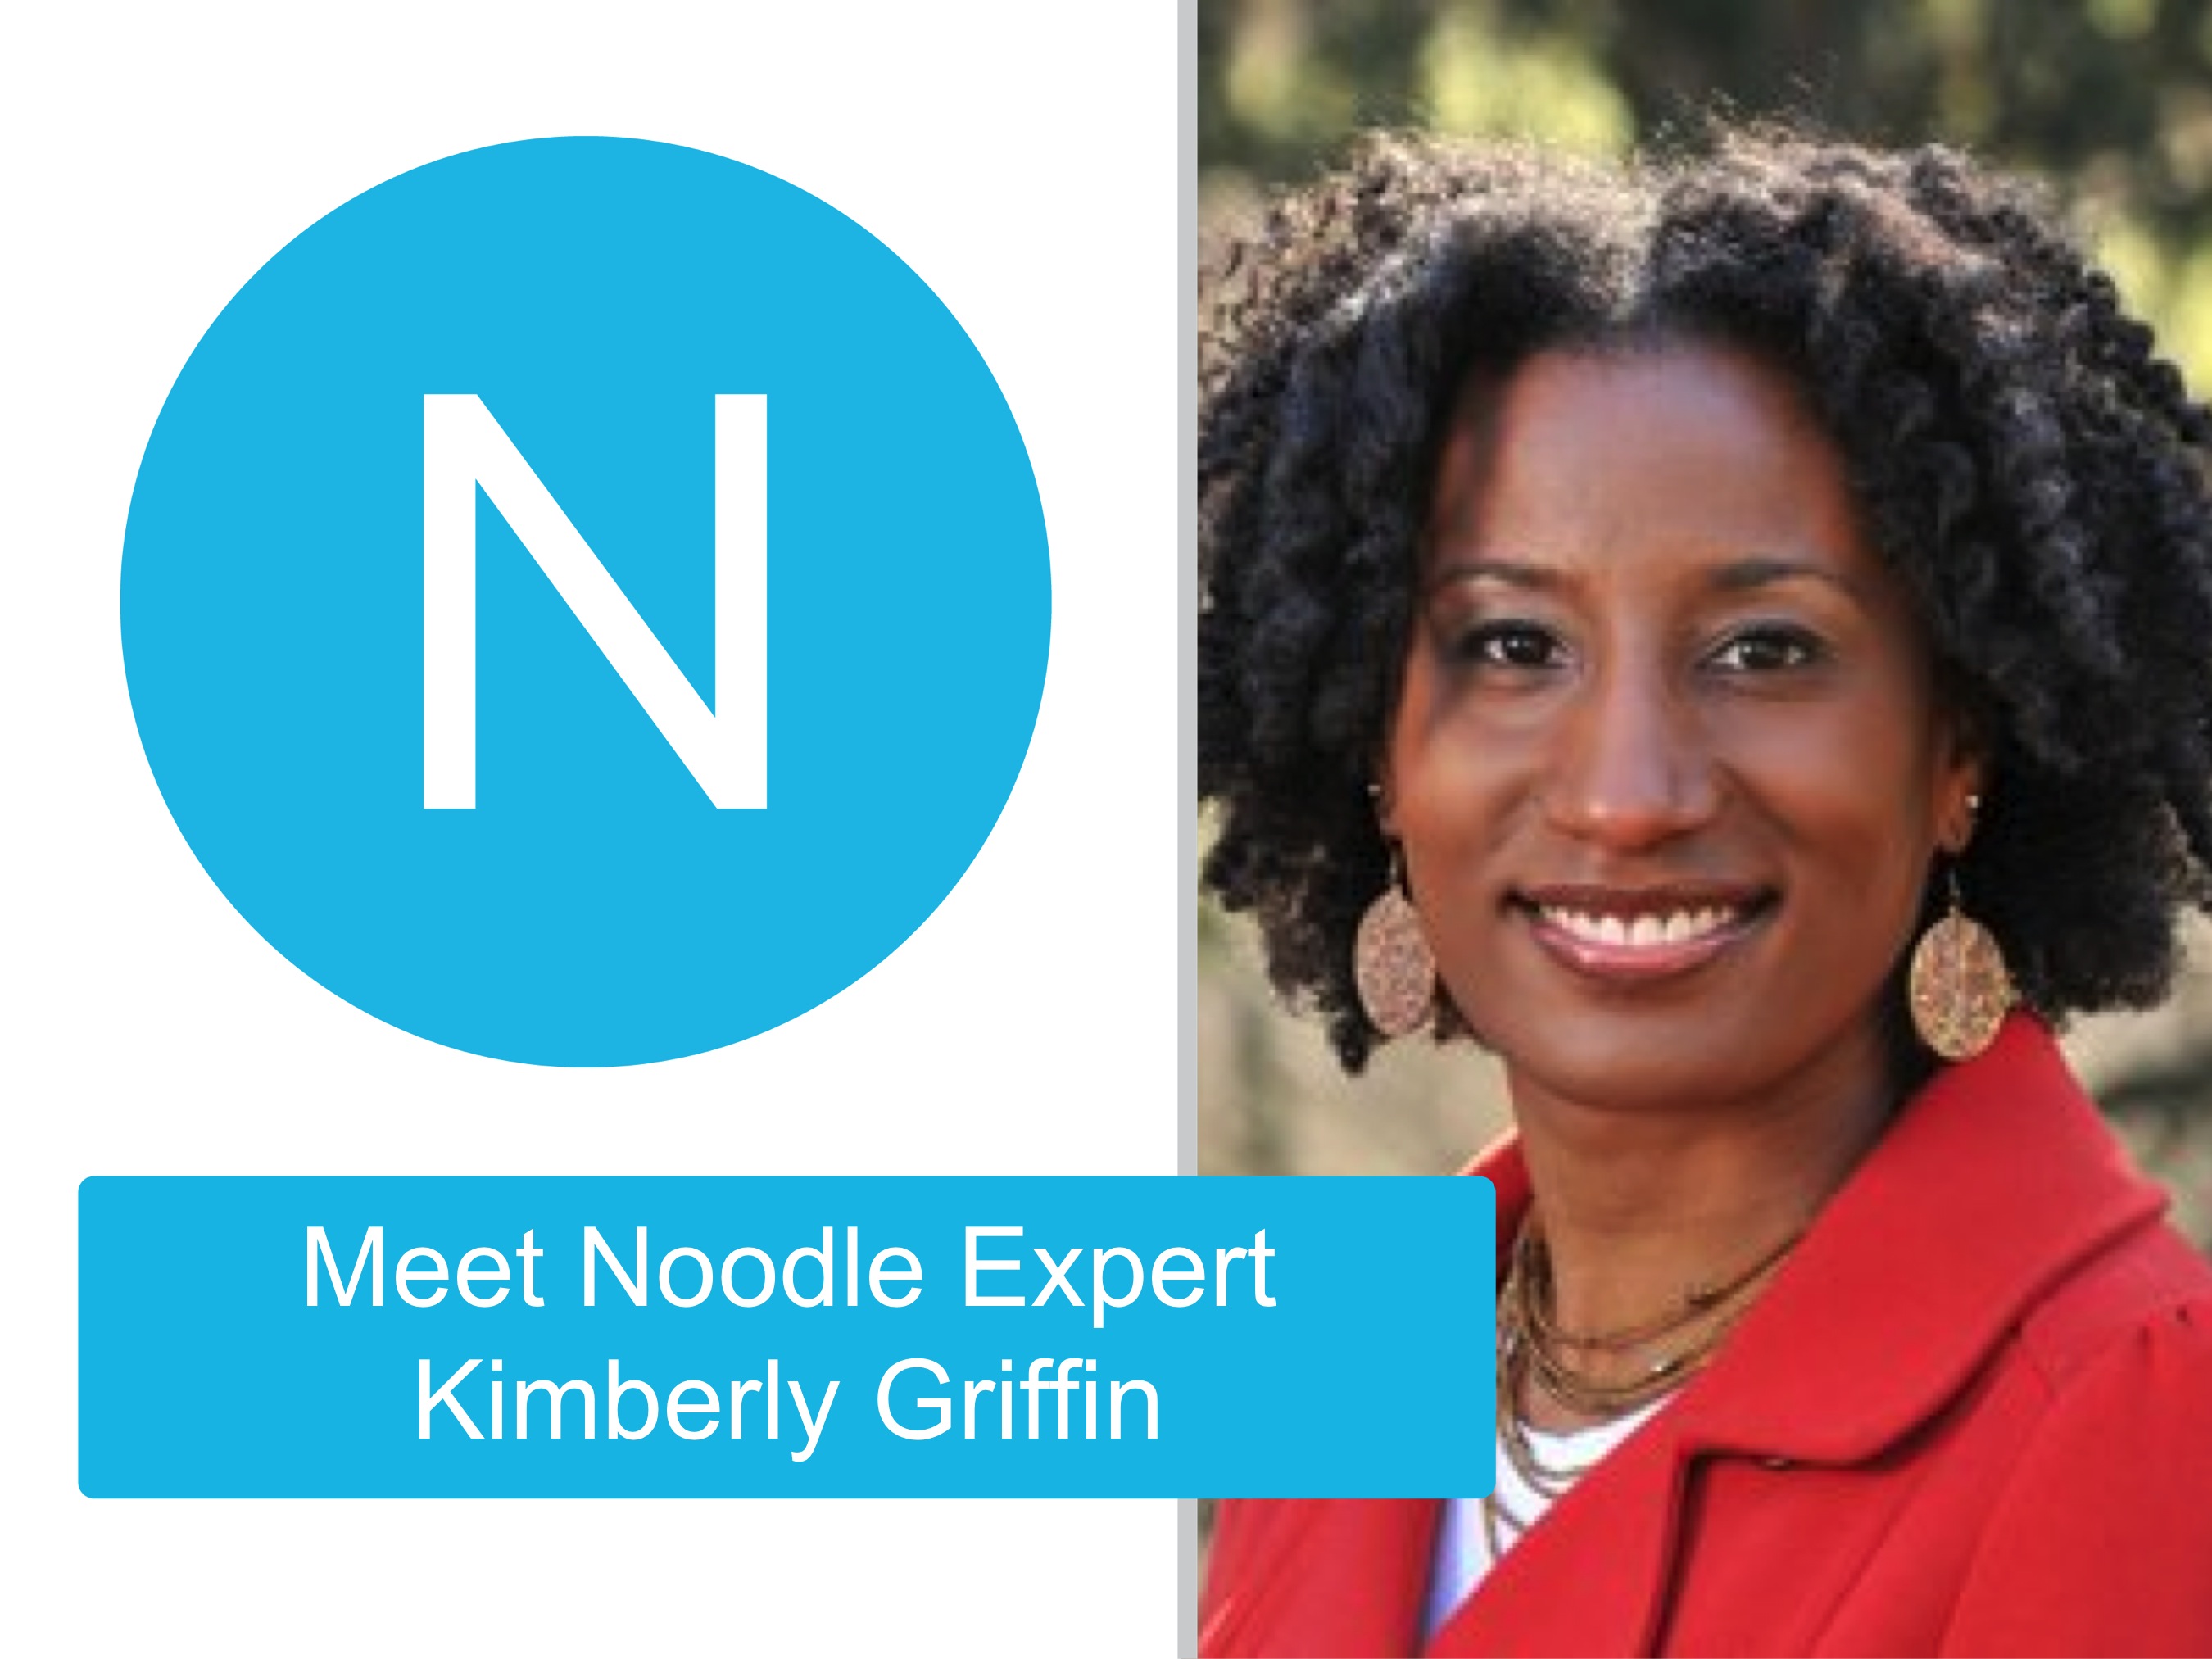 Kimberly Griffin on Eating Candy Bars Before Tests and “Staying on Her Own Mat”